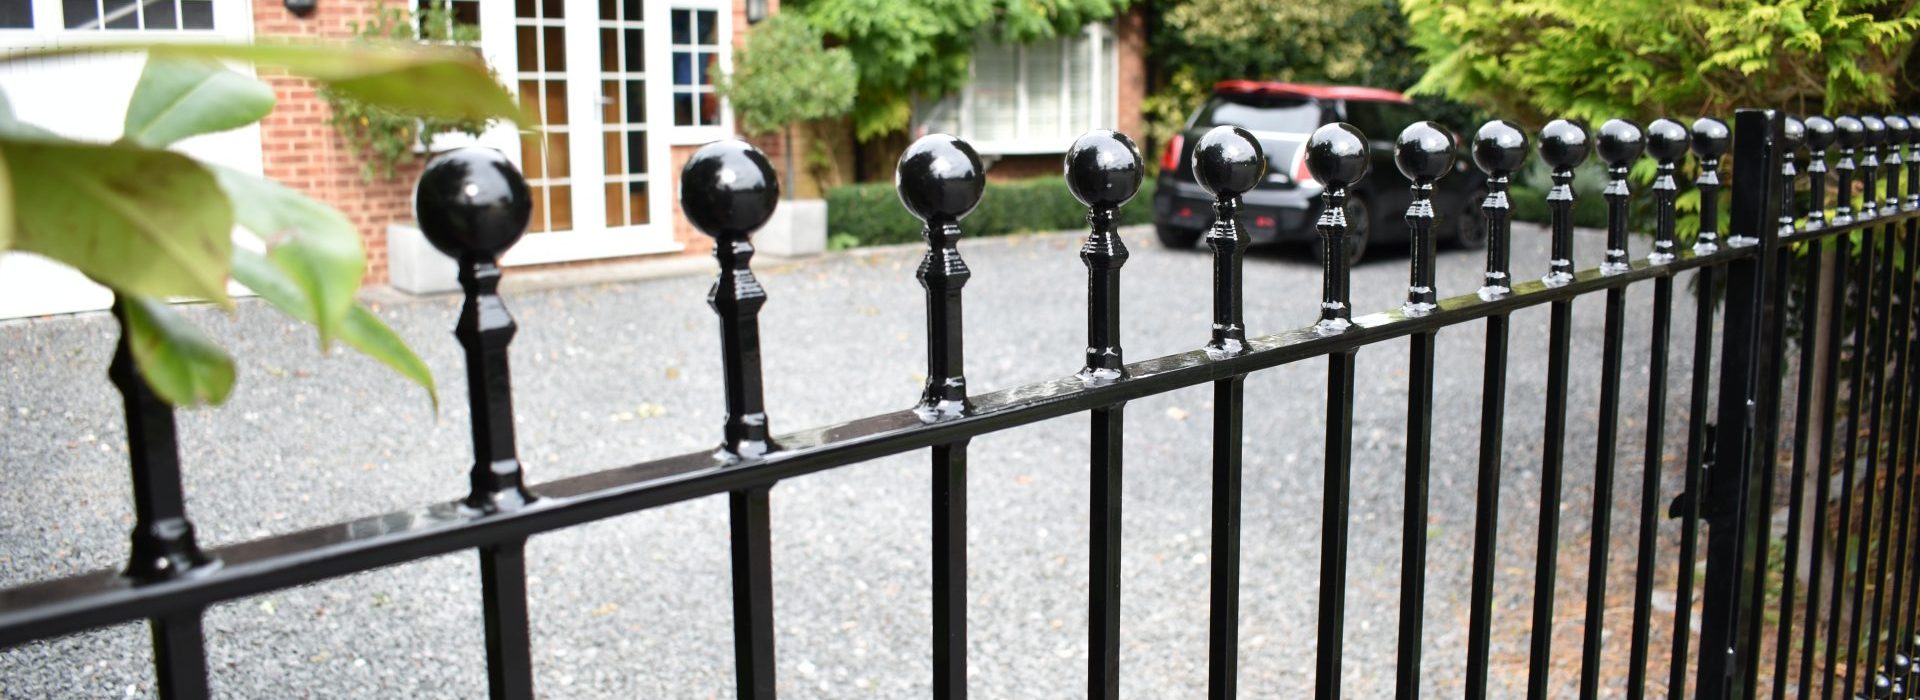 Wrought iron gates and railings made by The Blacksmith Shop and fitted at the front of a residence.